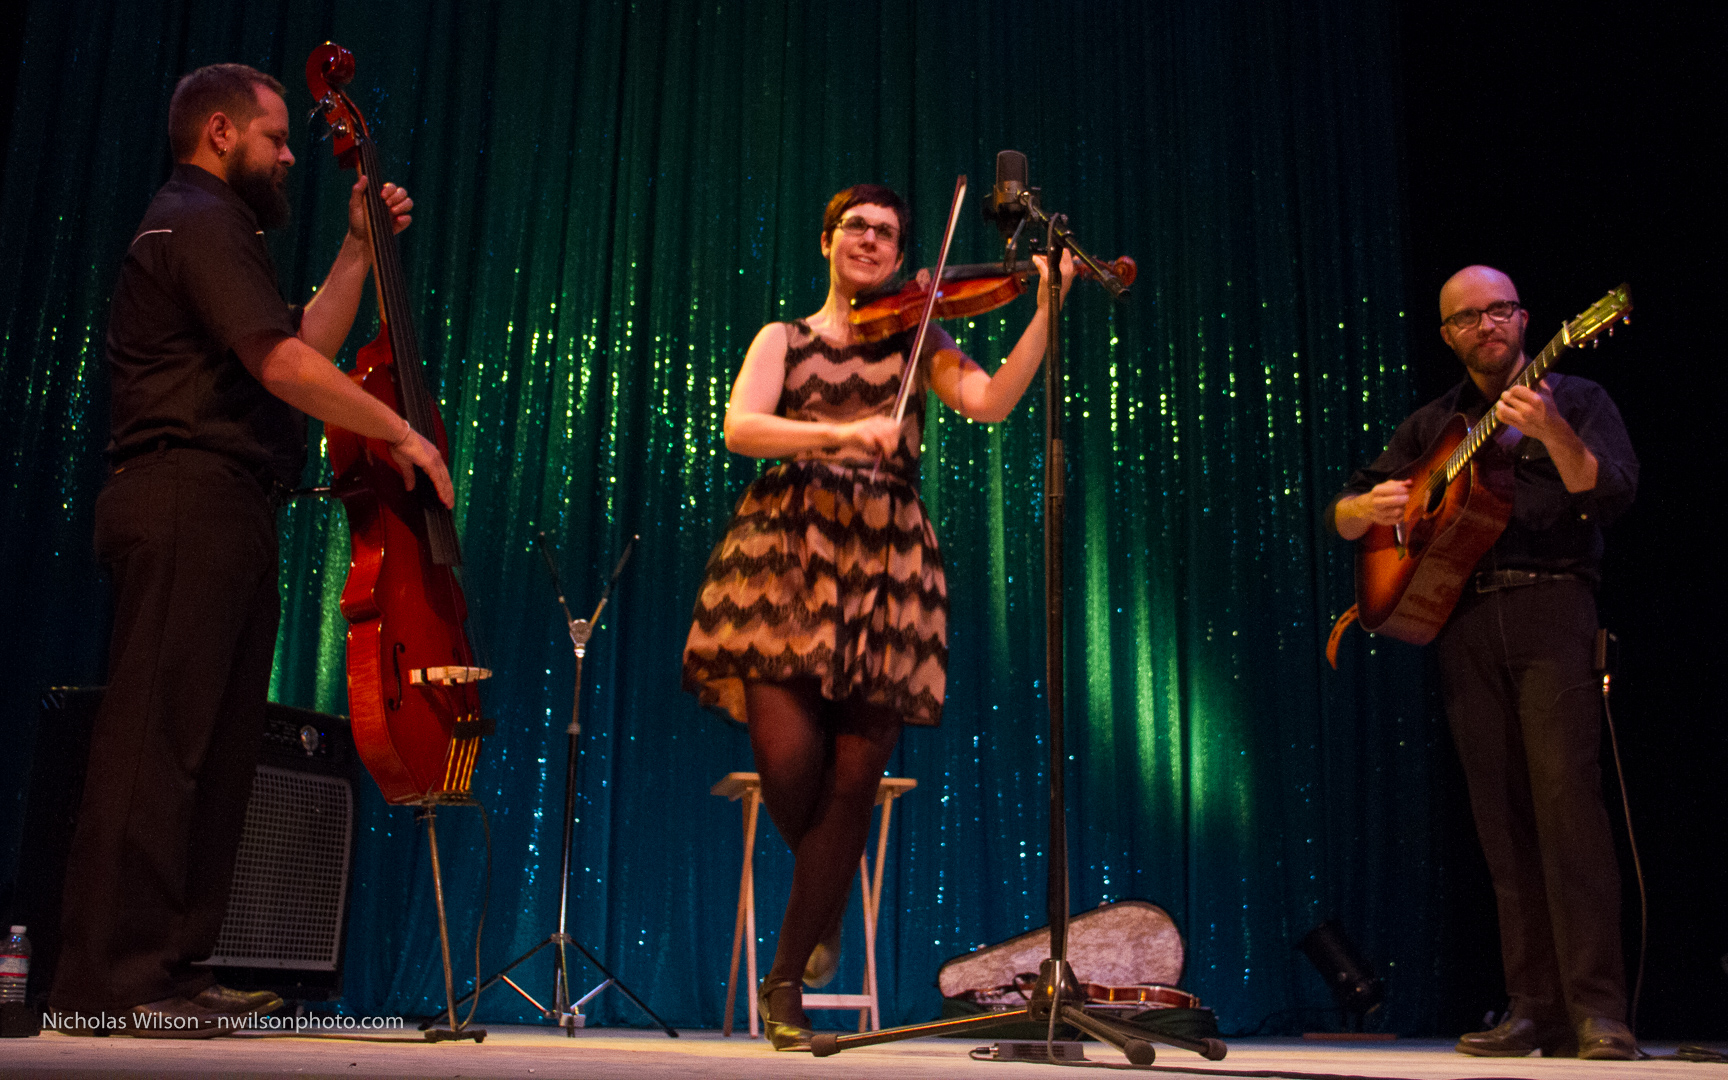 April Verch does step dancing and playing fiddle at the same time at Mendocino Music Festival 2014